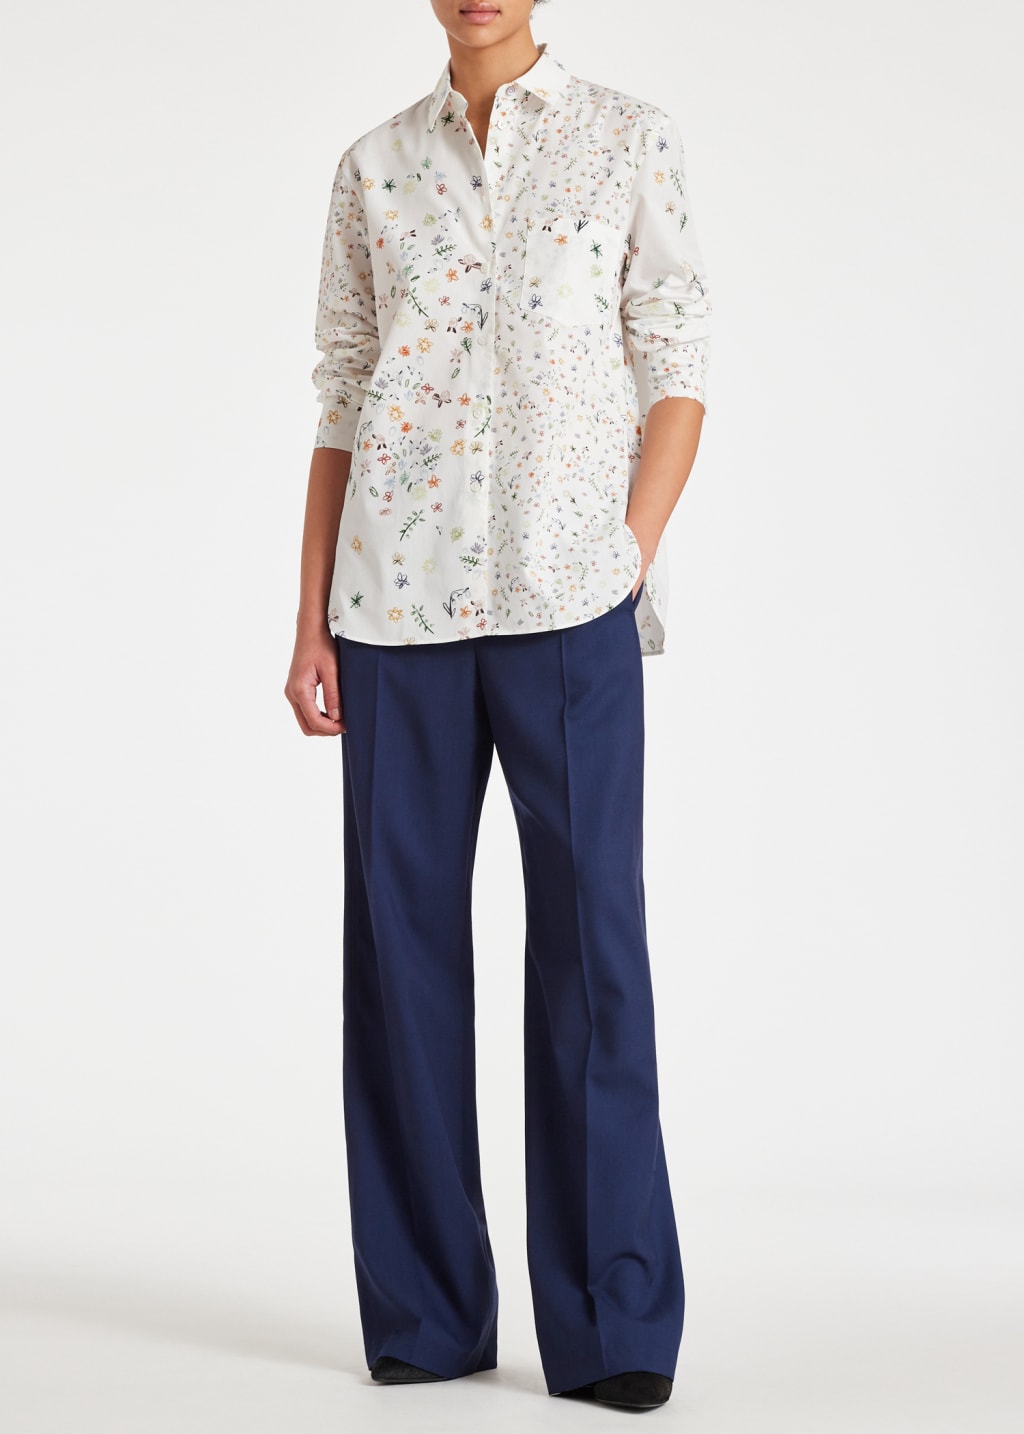 Model View - Women's White Relaxed-Fit 'Seedhead' Shirt Paul Smith